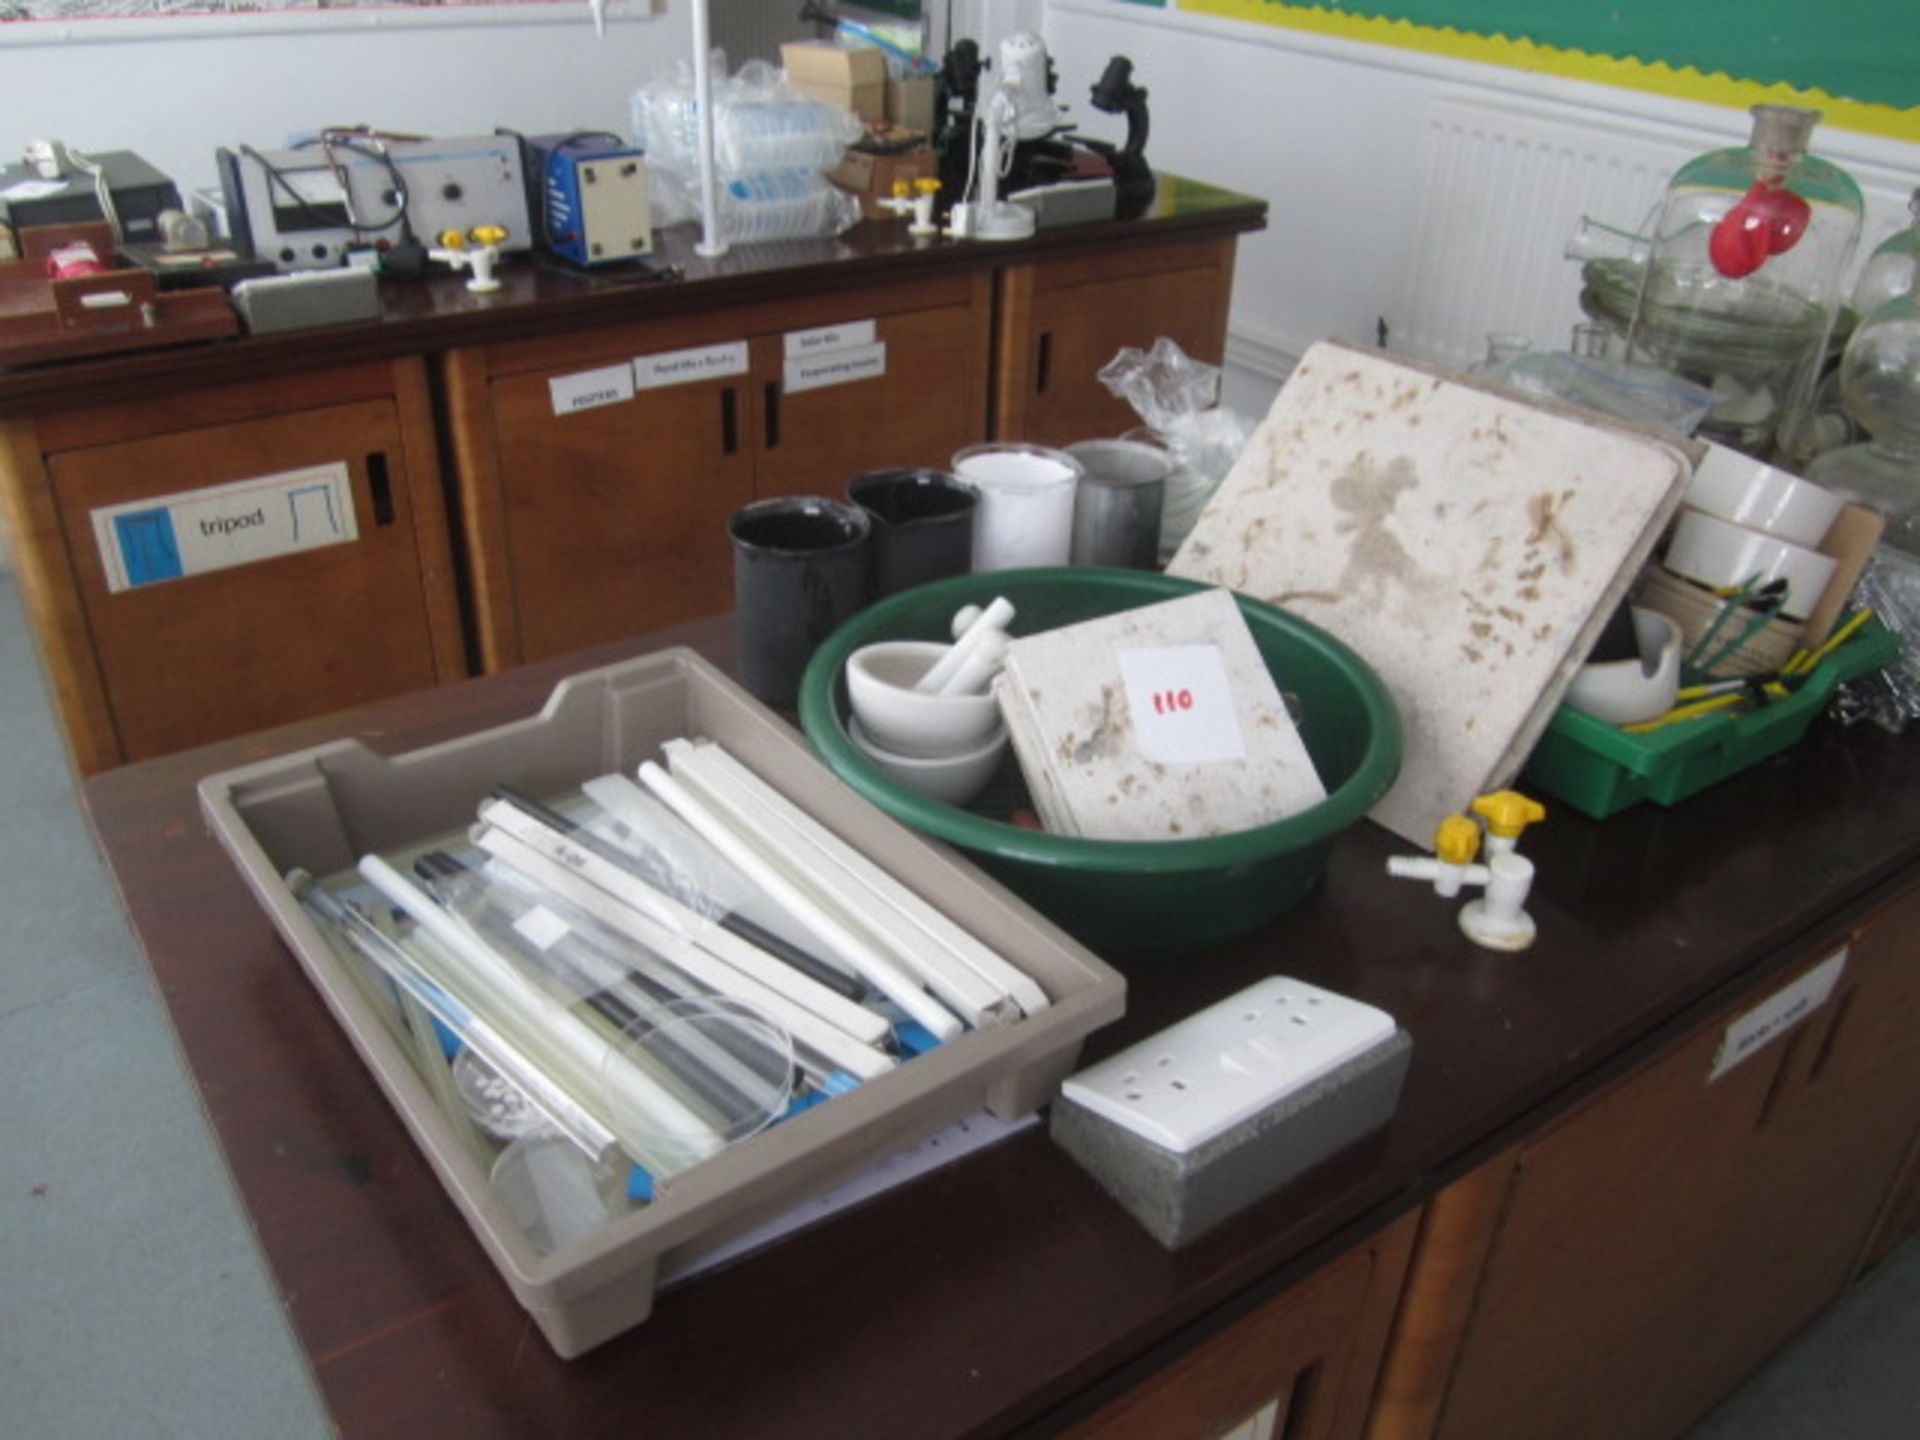 Assorted chemistry and science equipment including pestle and mortars, jugs, petri disks, slide - Image 5 of 15